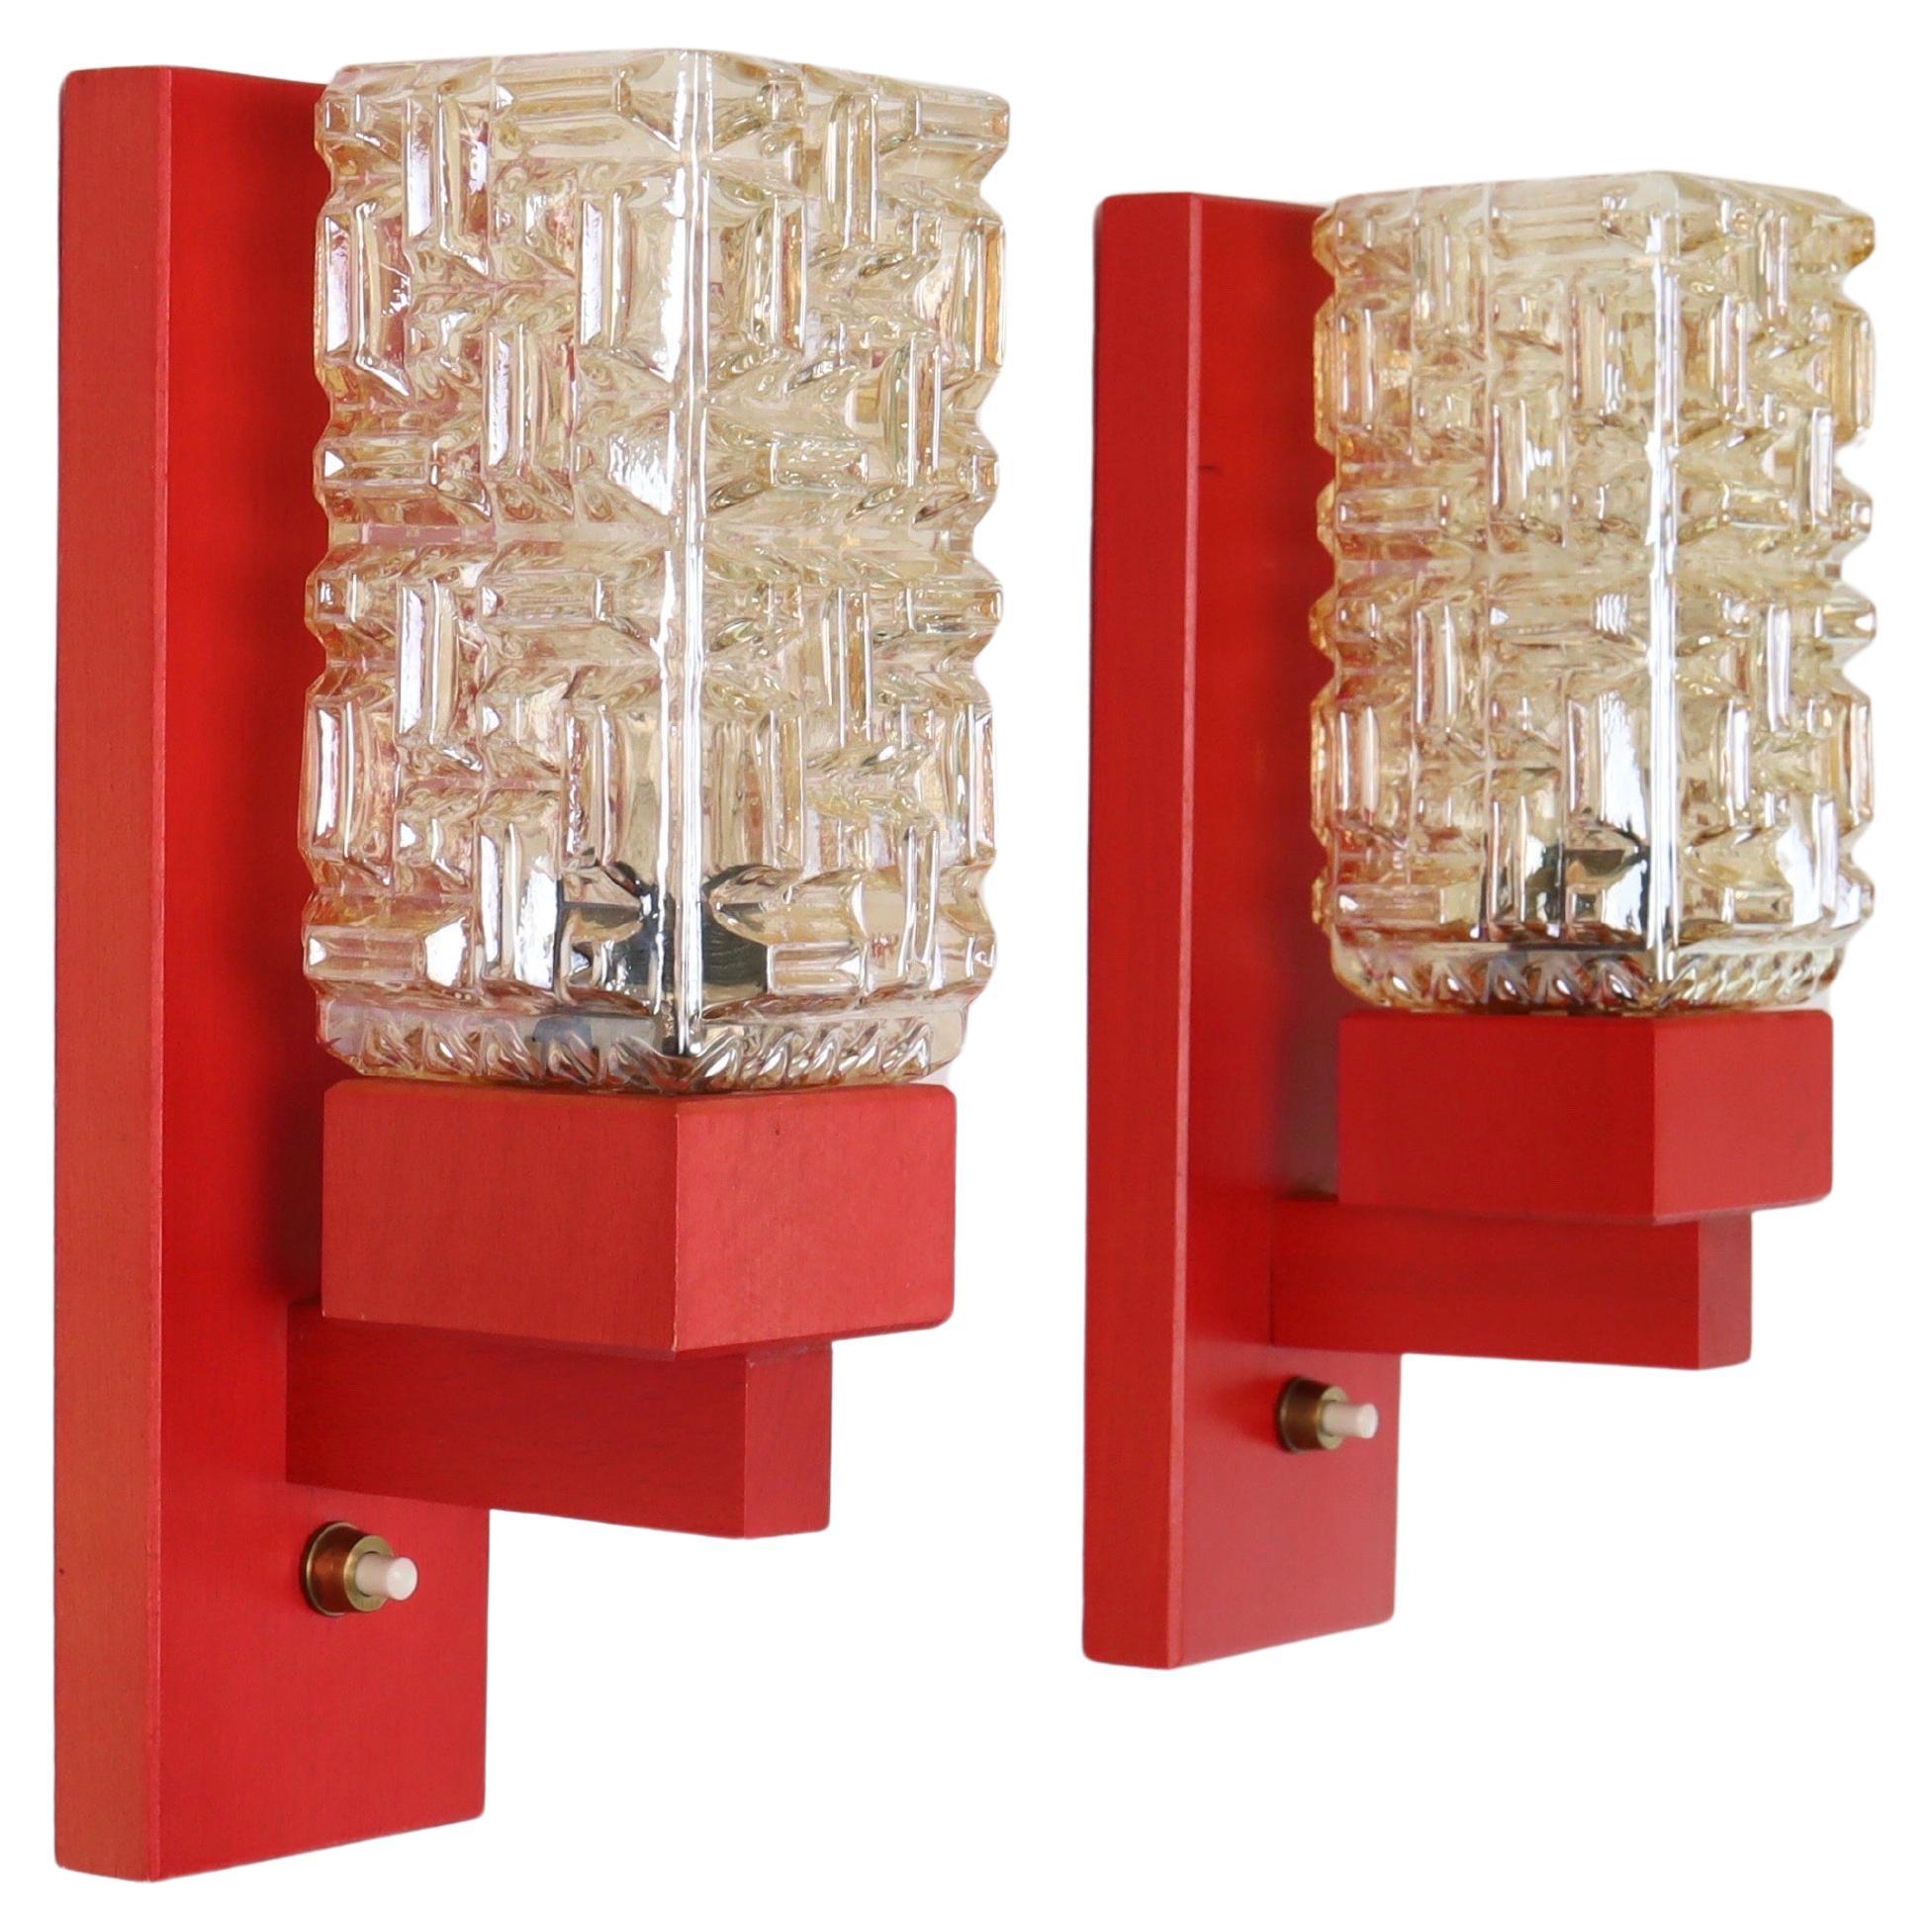 Set of 'Vitrika' Wall Lamps in Red stained wood & Amber Glass, Denmark, 1970s For Sale